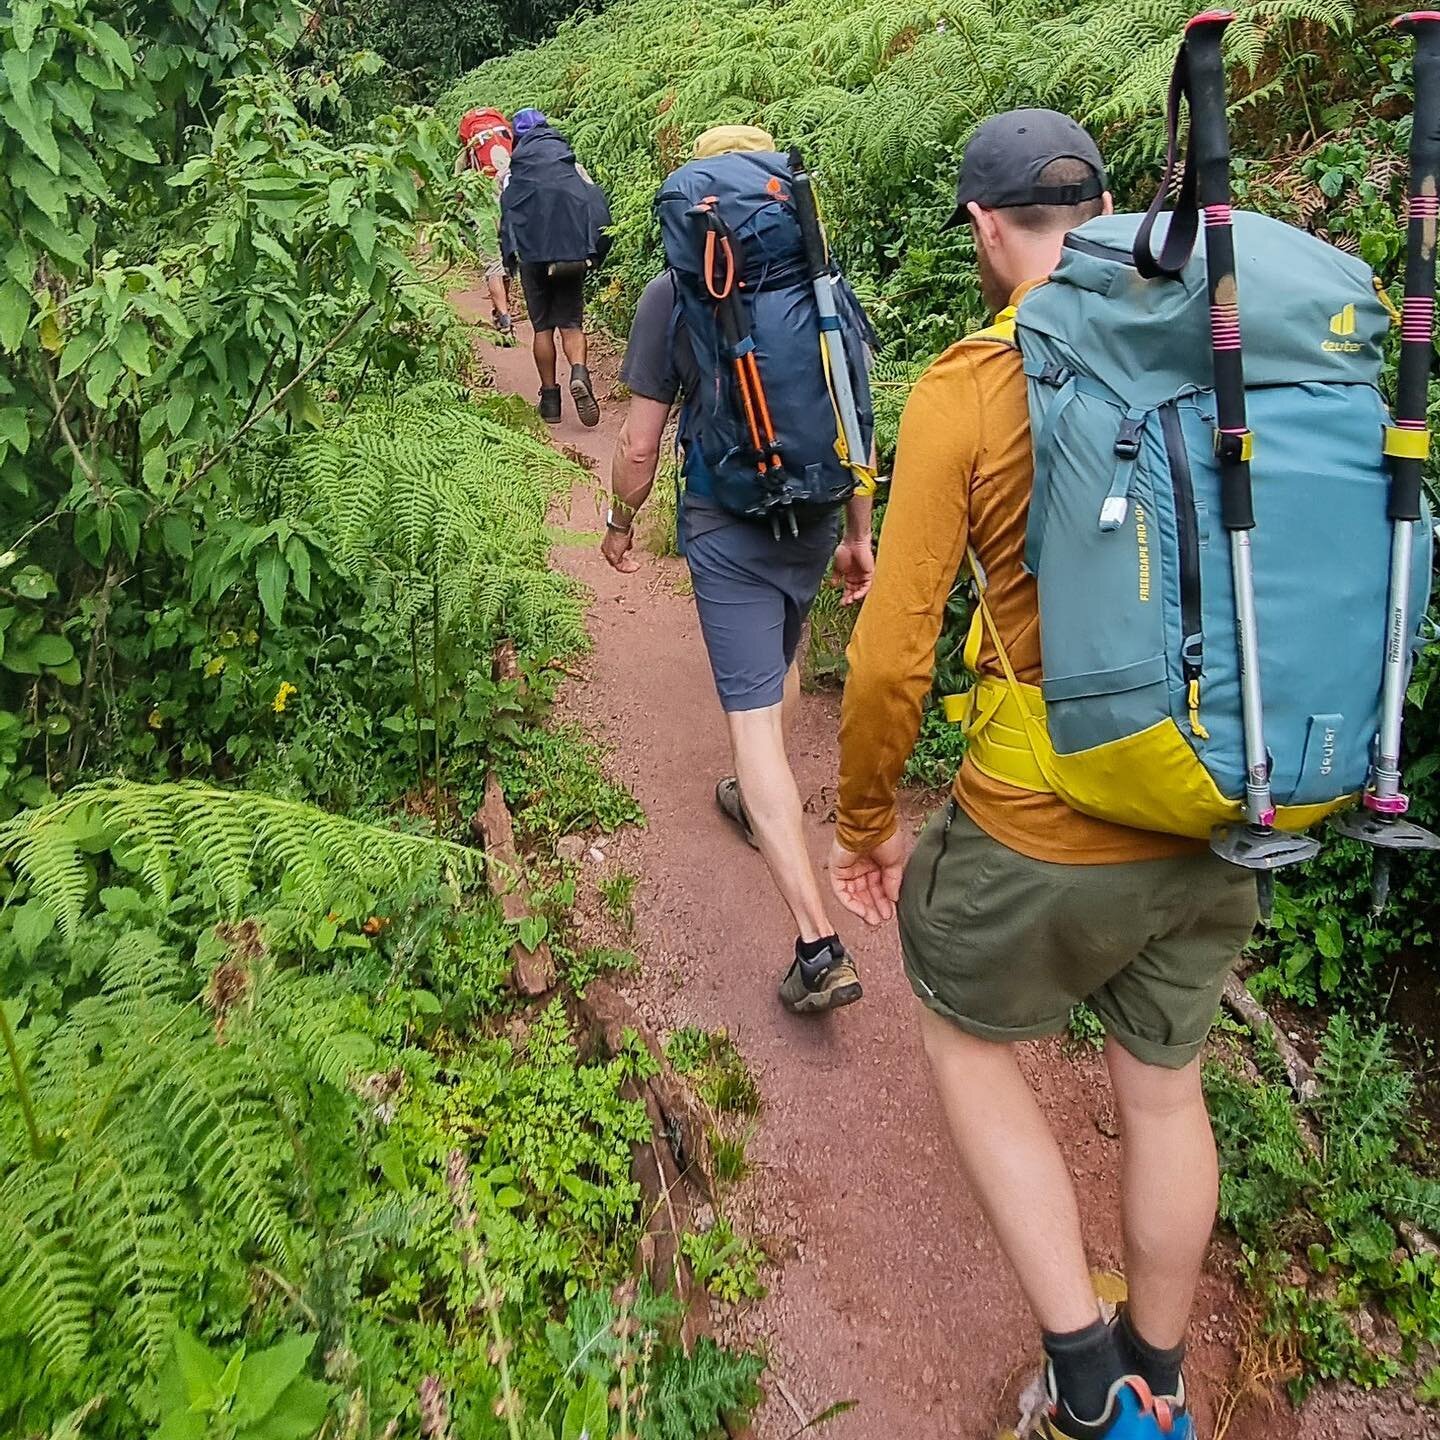 About 2 hours into our Kilimanjaro expedition. Hiking through the lush jungle at 2600m and saw lots of monkeys 🐒. It is as high as, or higher, than most European ski resort - and it looks like this!
#TheLastRideProject

@deuter @kilimanjaro.dreamers